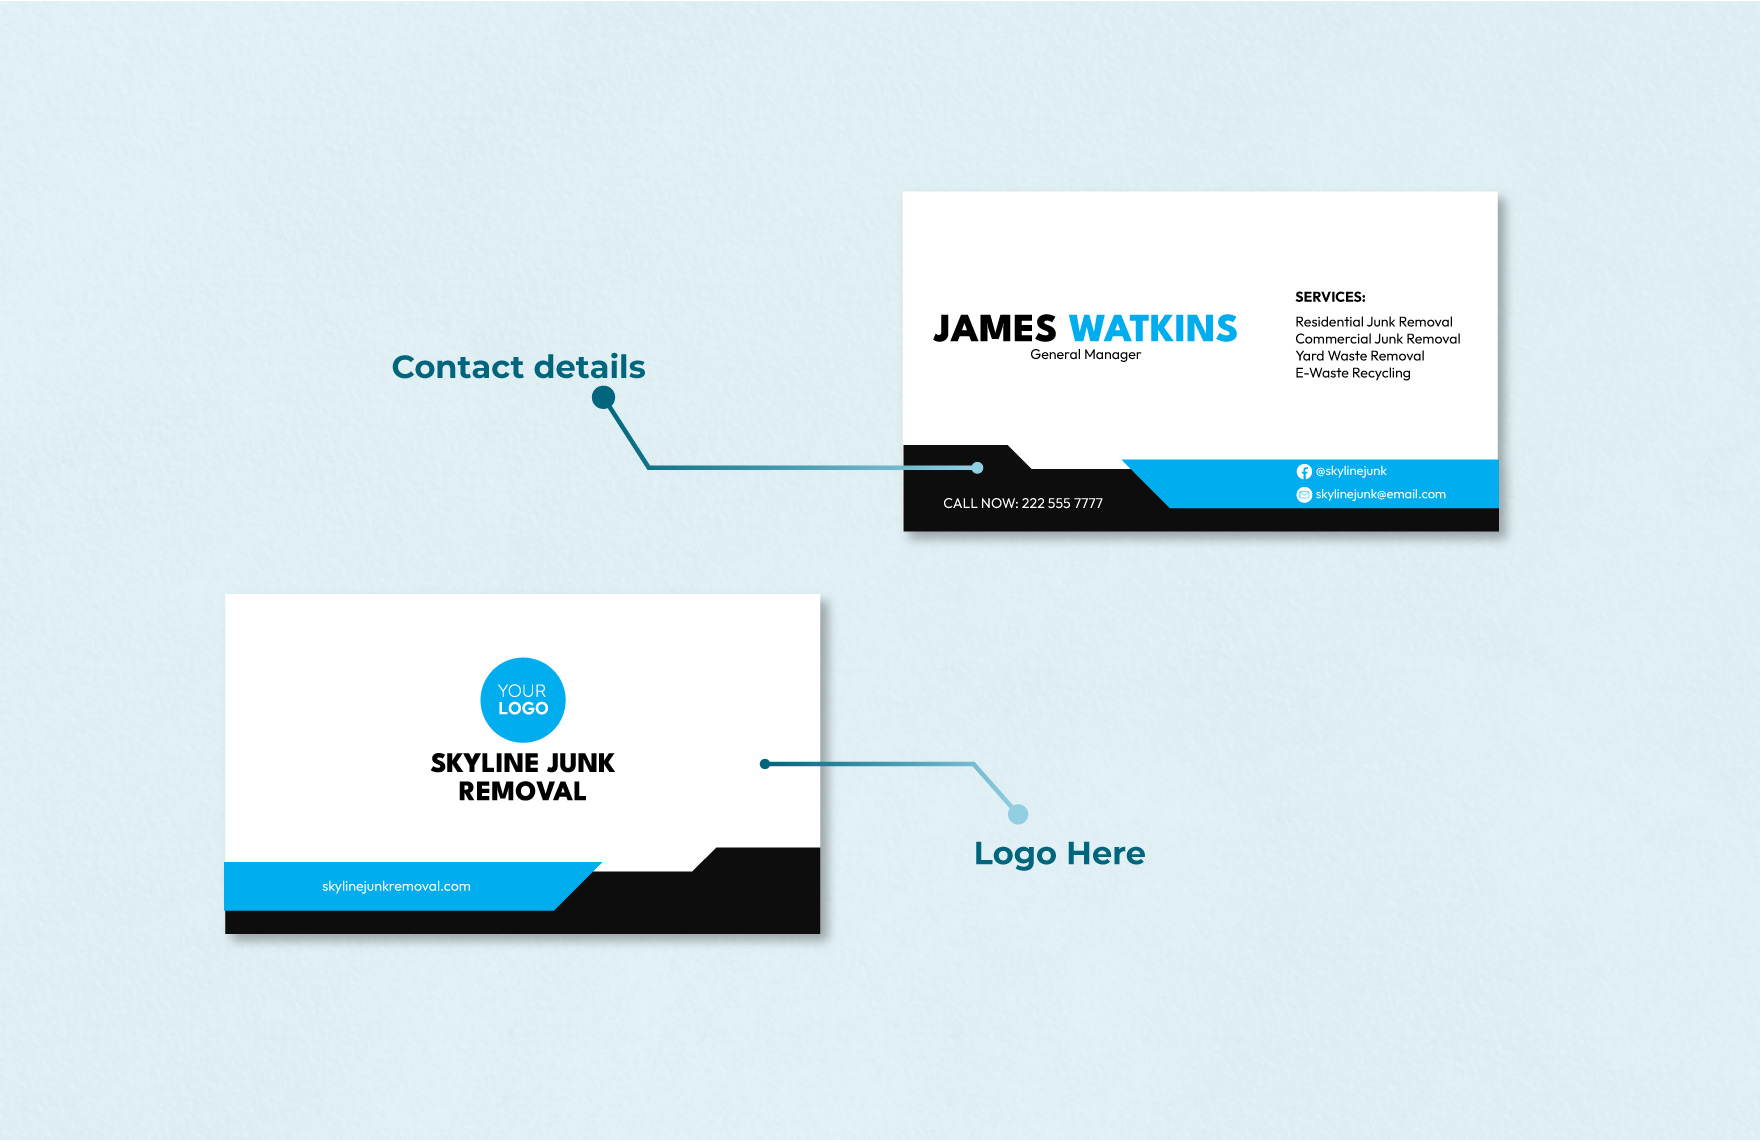 Junk Removal Business Card Template